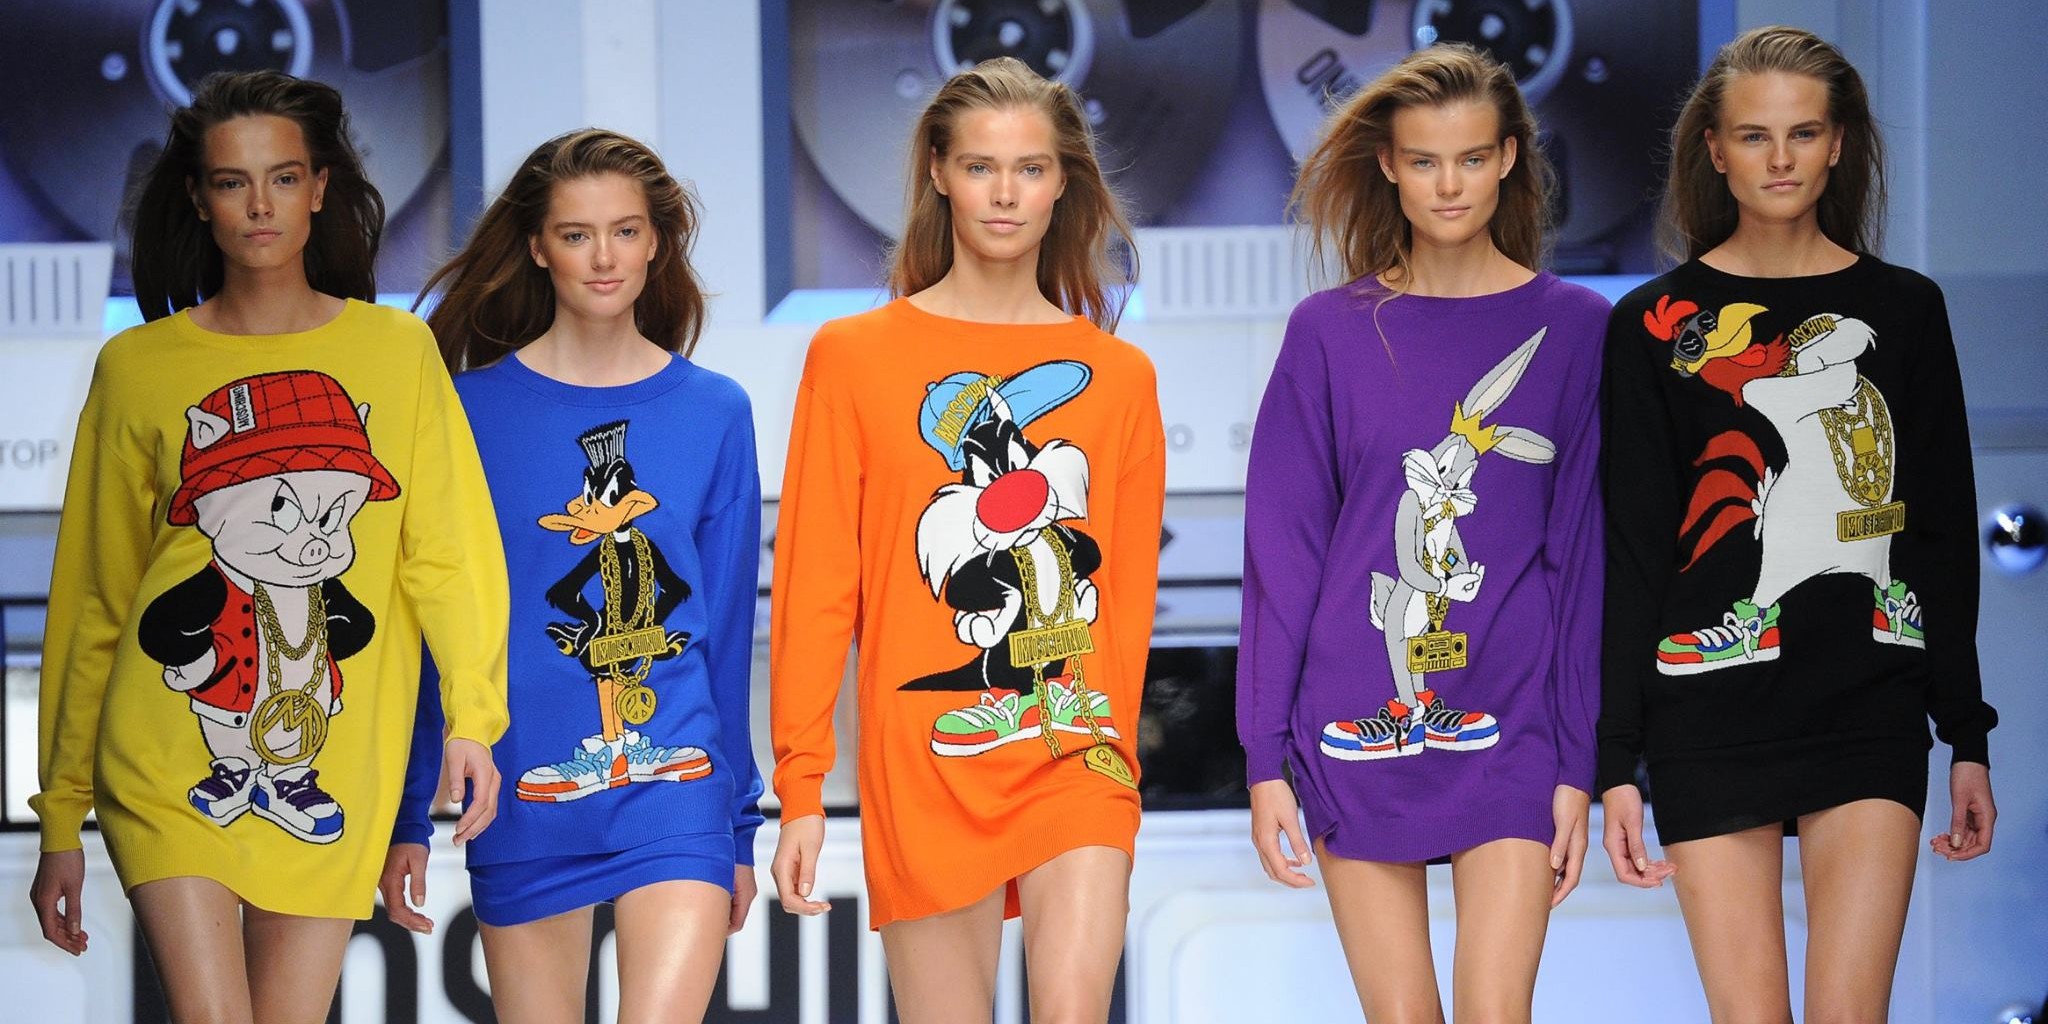 Looney Tunes' takes over the runway at Milan Fashion Week - The